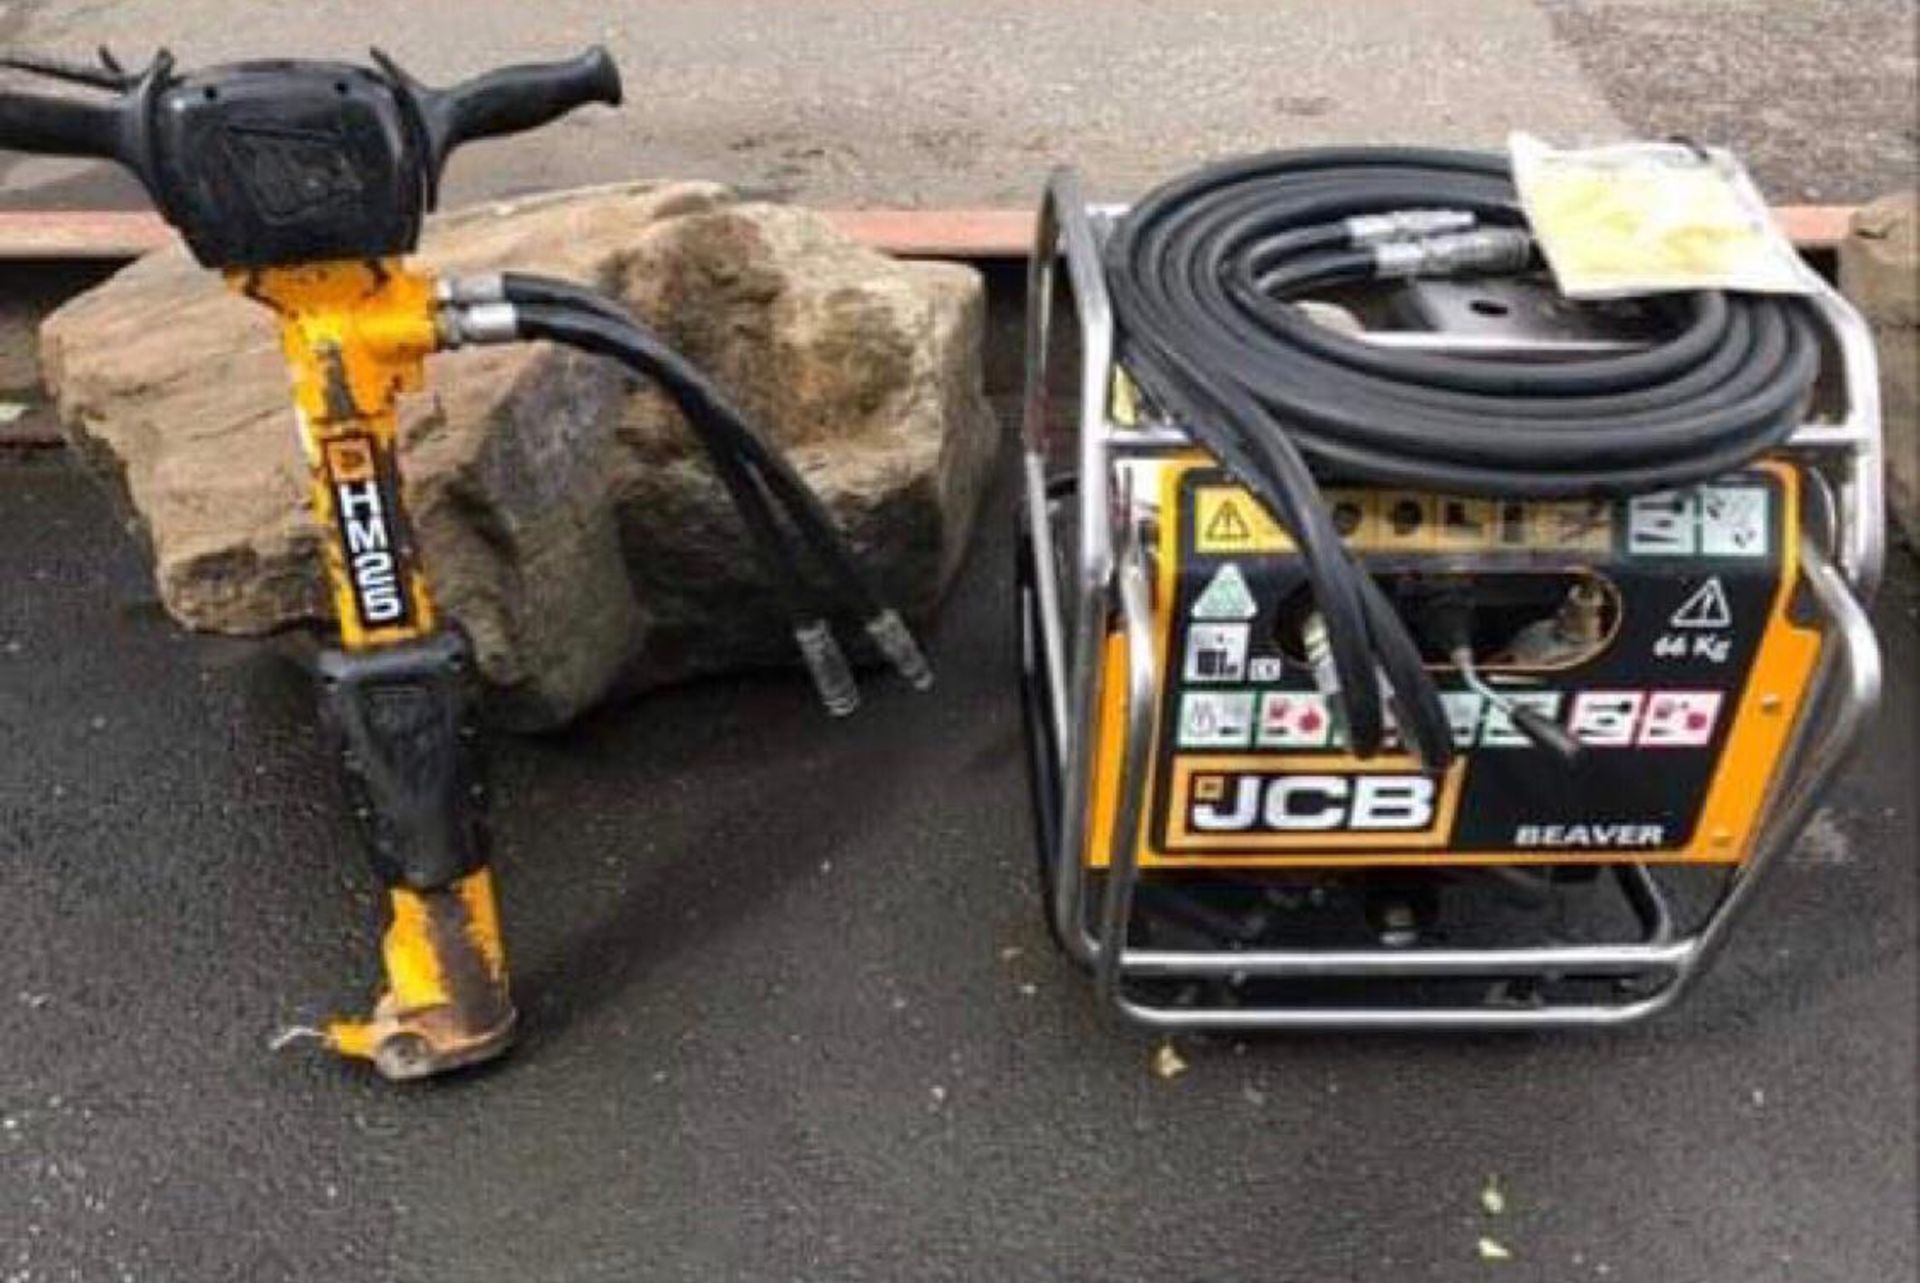 2017 JCB BEAVER PACK, RUNS AND WORKS, CLEAN MACHINE, C/W HOSE, BREAKER AND CHISEL *NO VAT* - Image 5 of 6